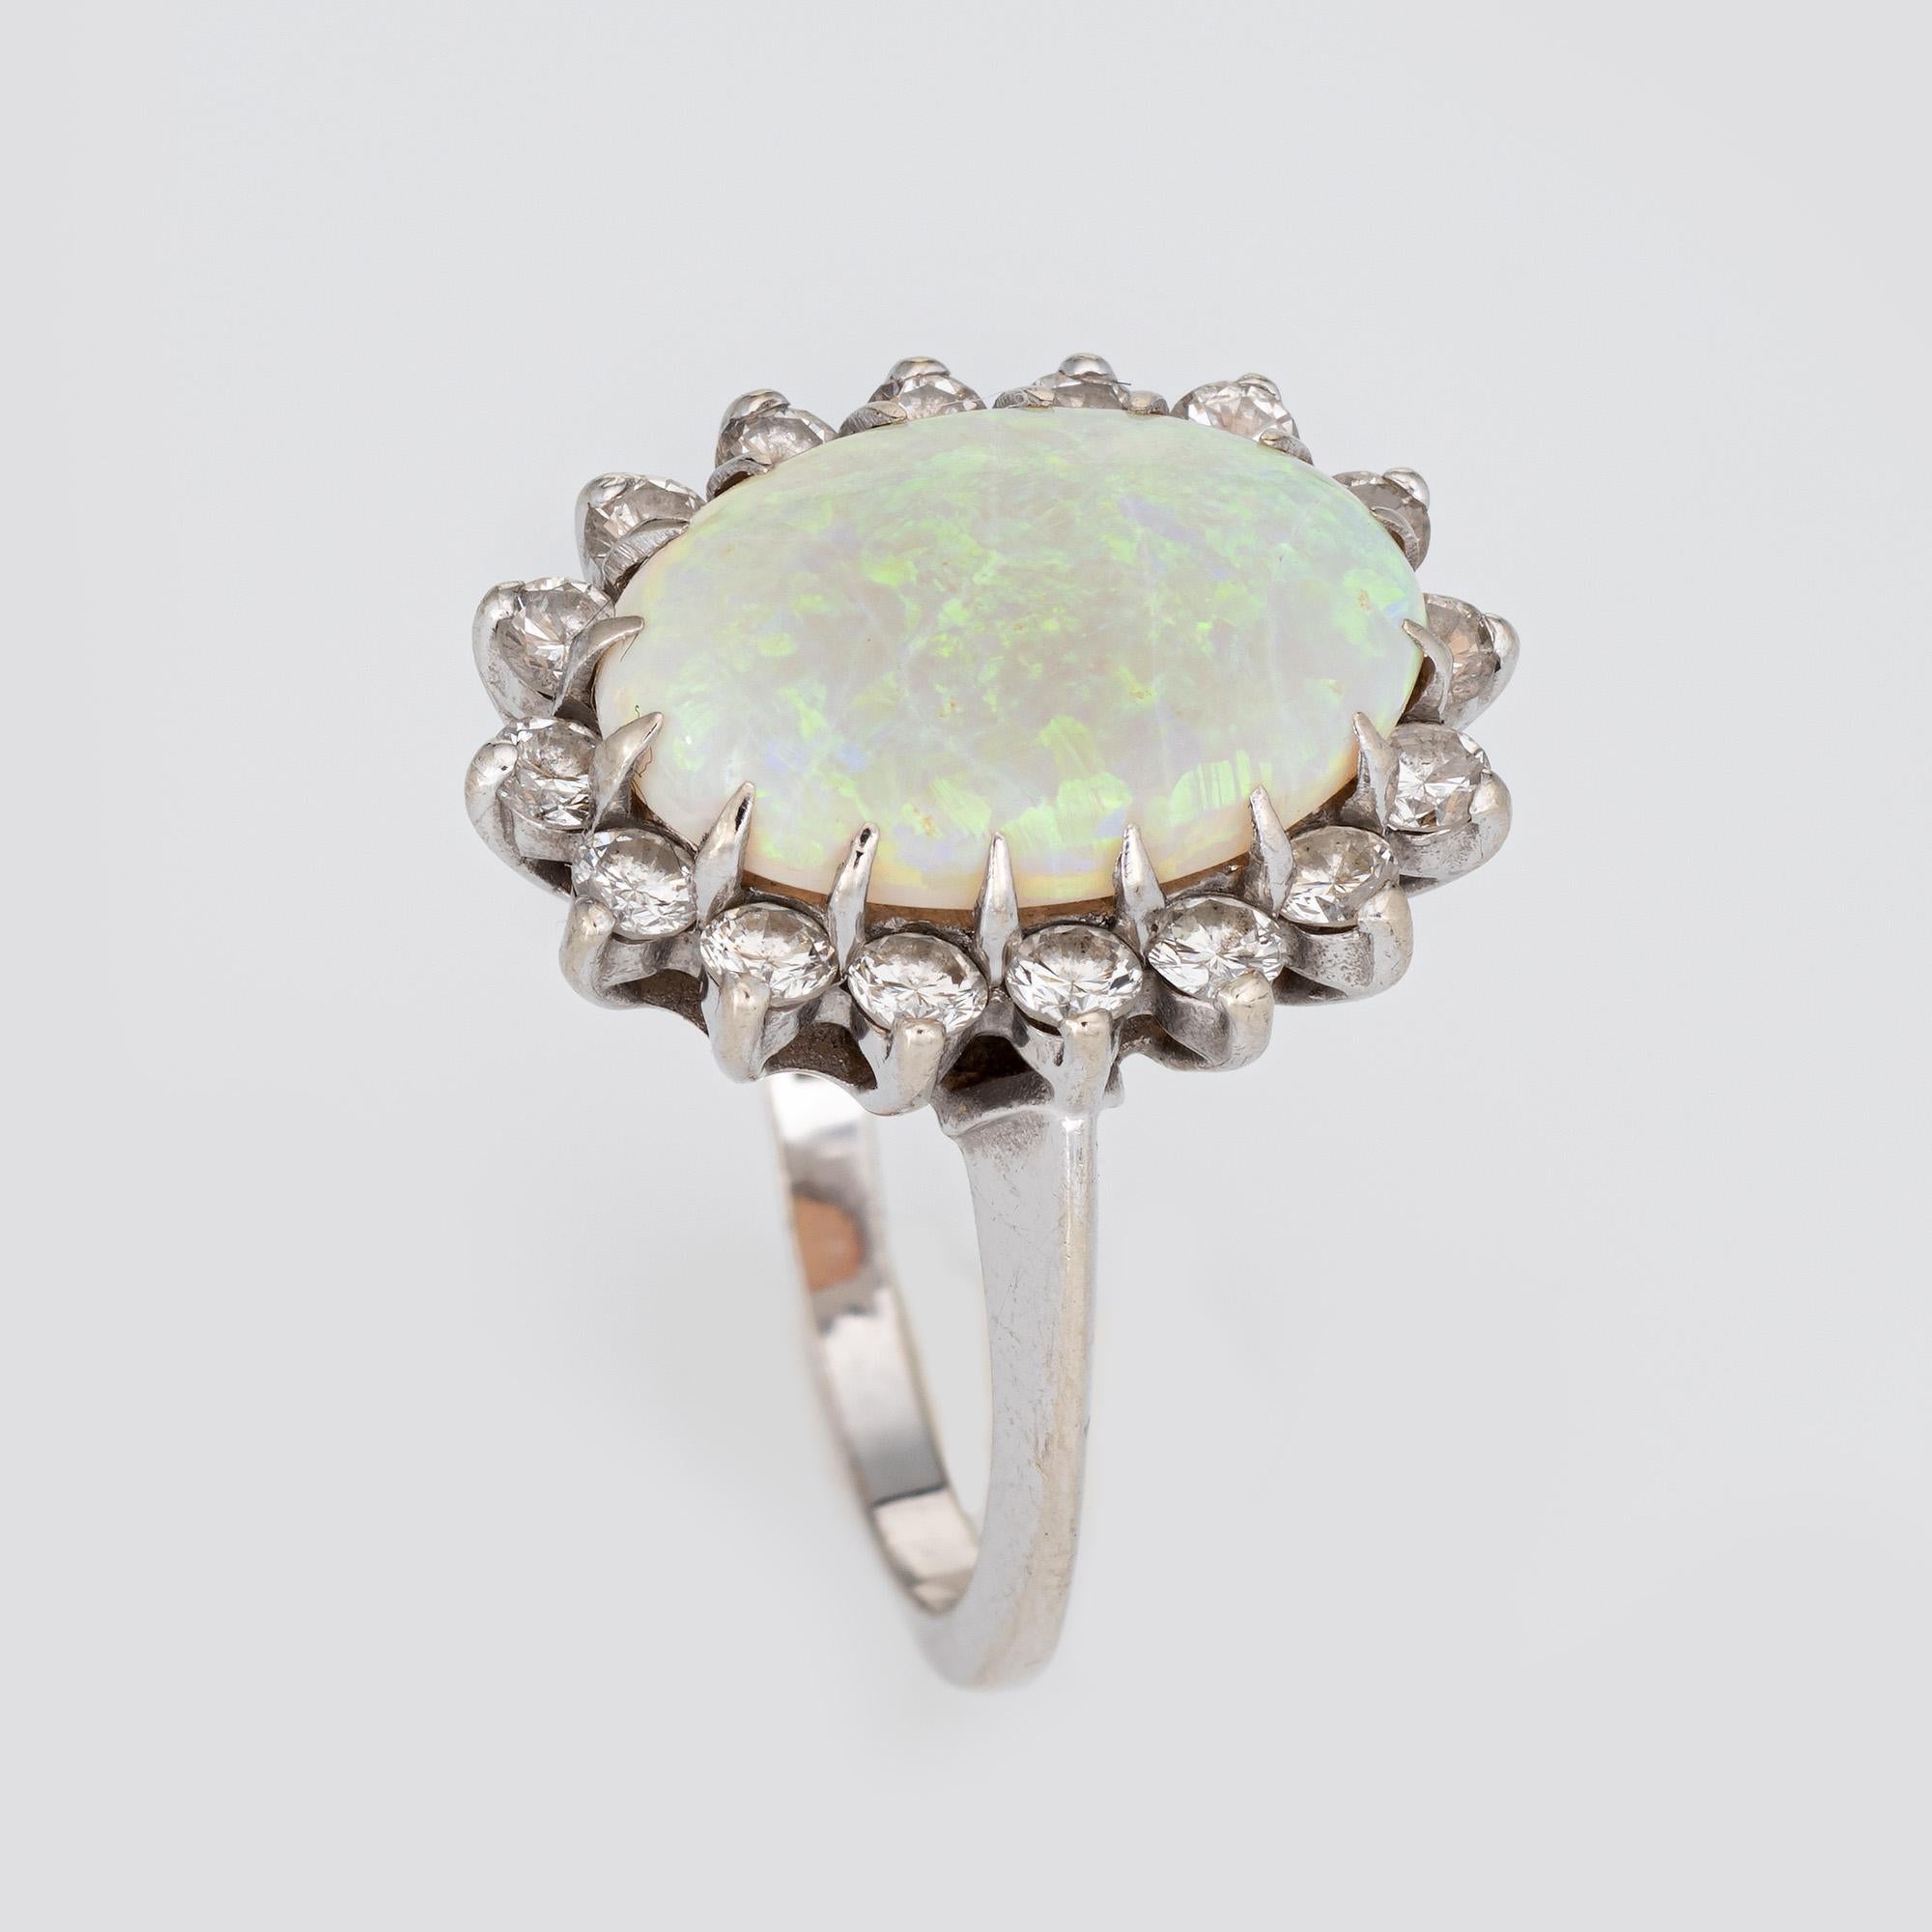 Stylish vintage natural opal & diamond ring (circa 1950s to 1960s) crafted in 14 karat white gold. 

Natural opal measures 15mm x 10mm (estimated at 6 carats). 16 round brilliant cut diamonds are estimated at 0.05 carats each and total an estimated